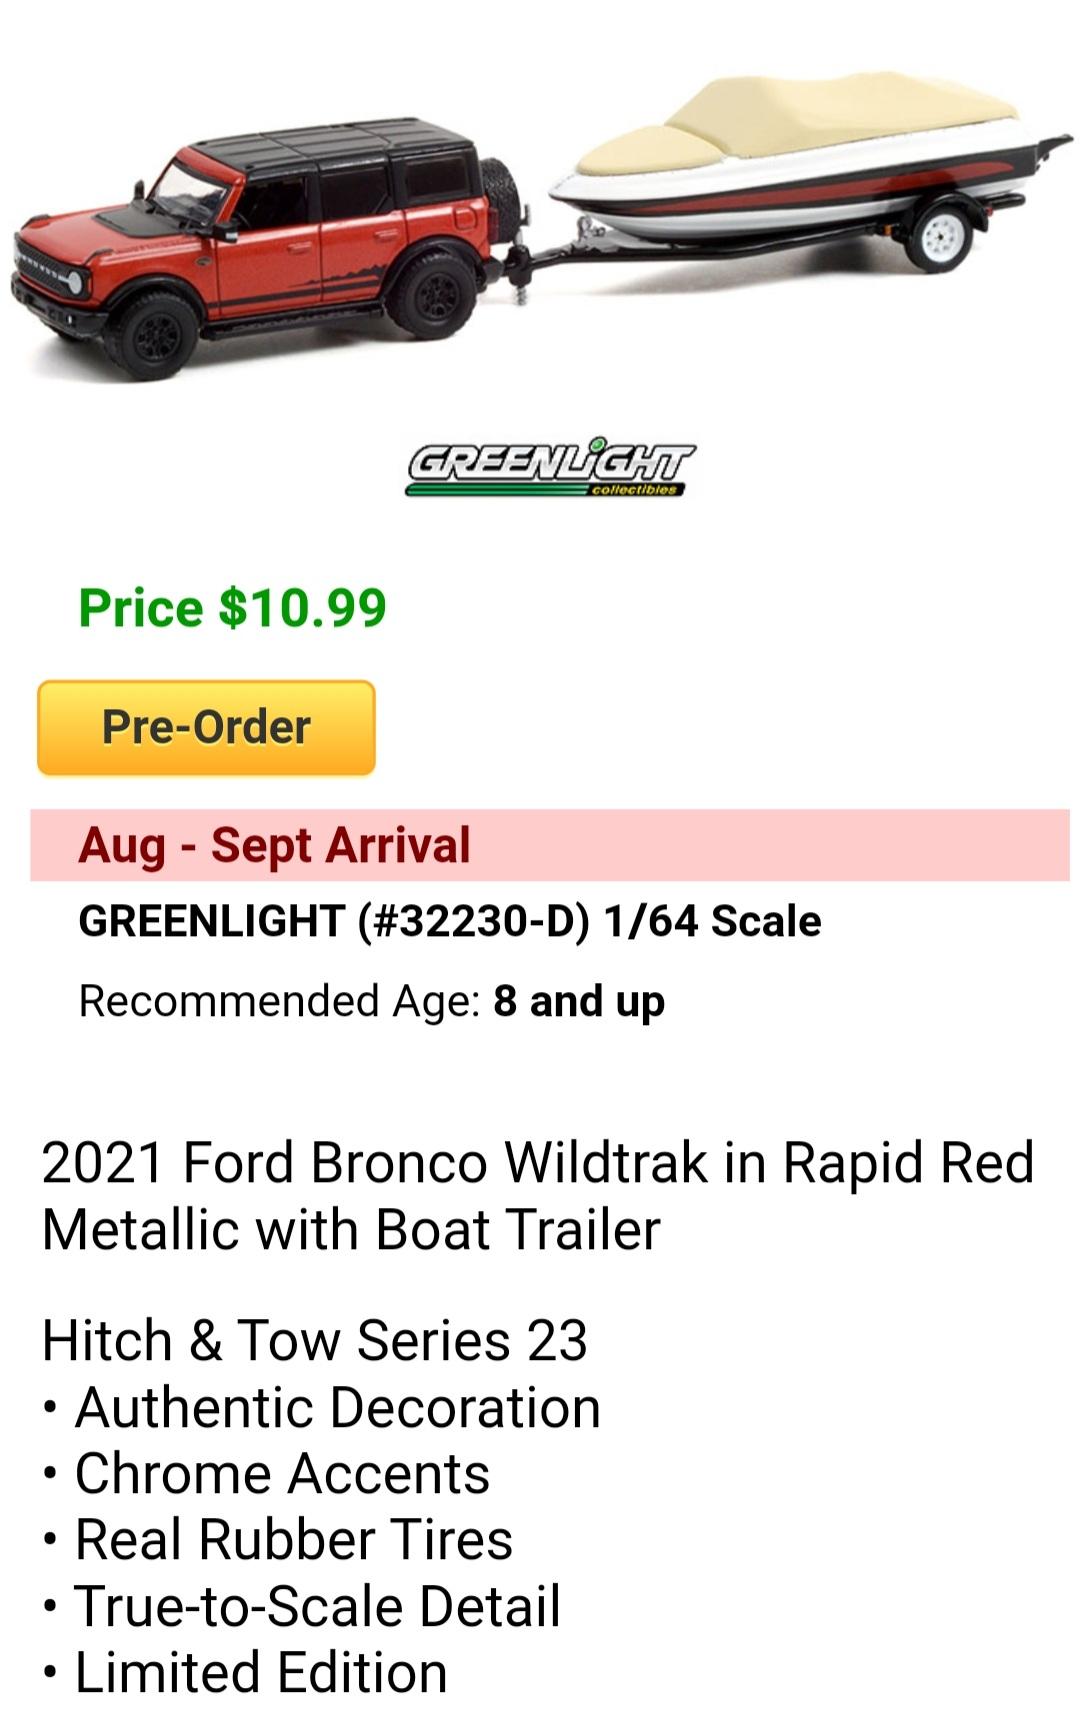 Ford Bronco Received Bronco family diecast models from Ford for converting reservation without consent Screenshot_20210510-063717_Chrome